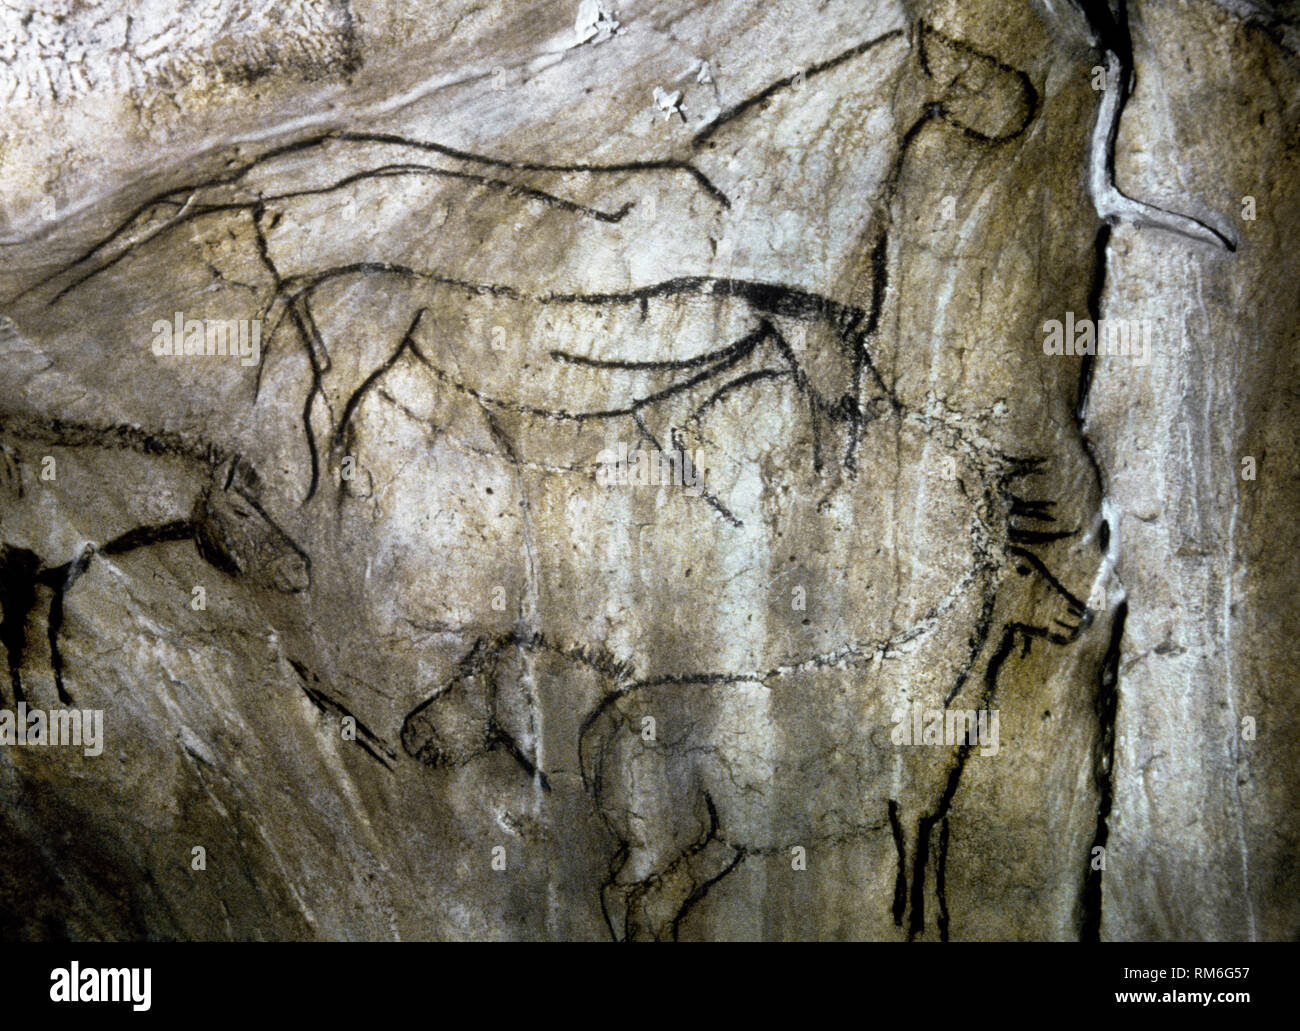 Cave of Niaux. Black Hall panel. Painting depicting a horse and deer, executed in a Black-outlined style. Late Upper Paleolithic. Magdalenian Culture, c. 13.000 BCE. Ariege, southwestern France. Europe. Stock Photo